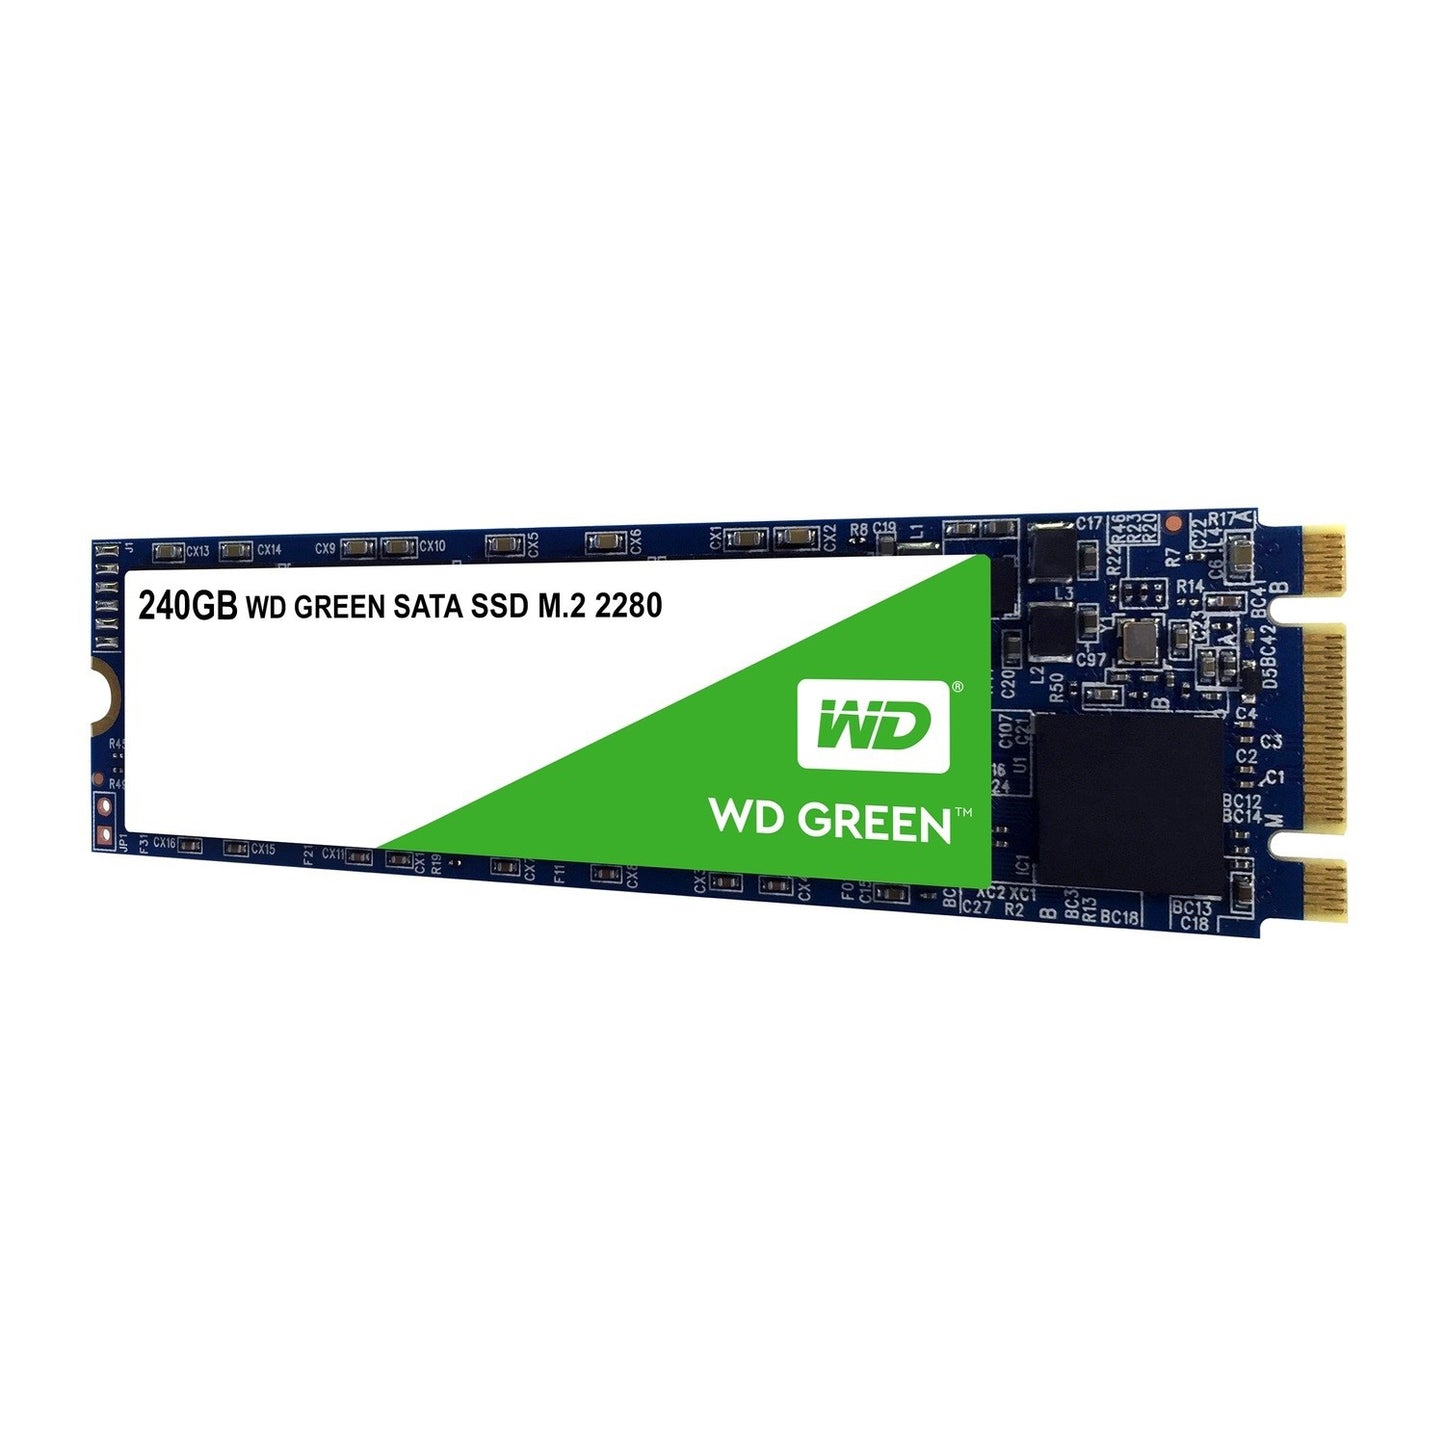 WD Green 240GB M.2 2280 SATA 3D NAND SSD/Solid State Drive